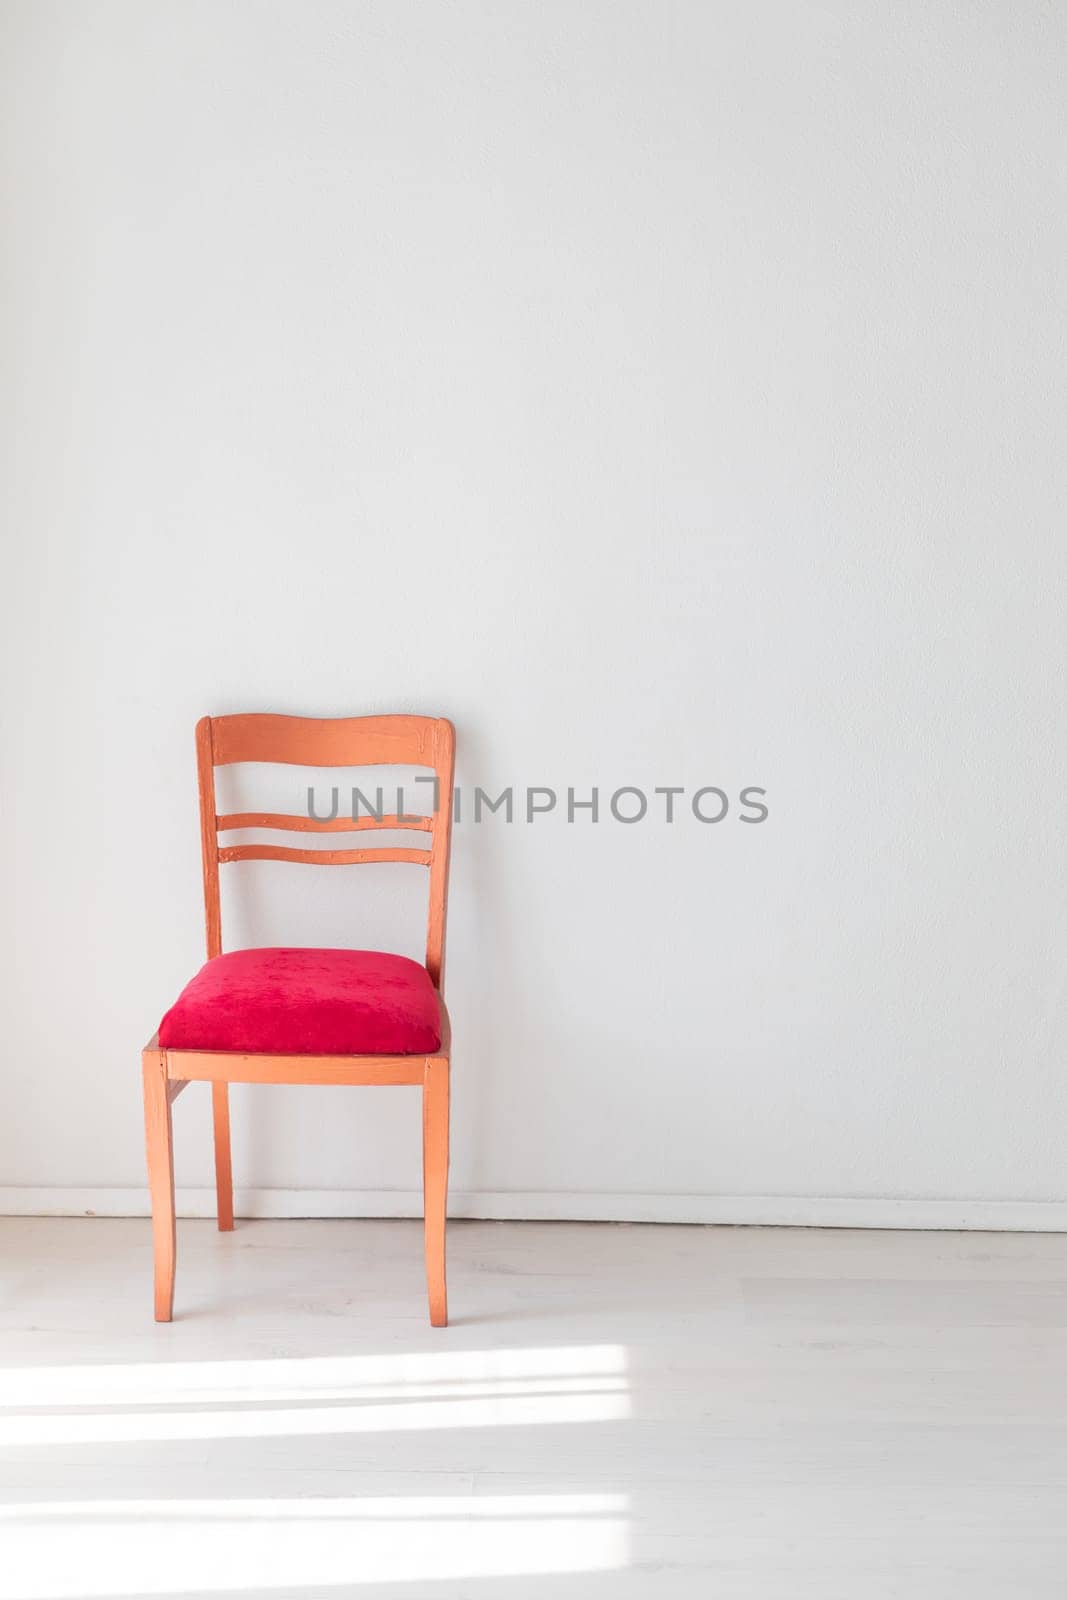 red vintage chair in white room interior by Simakov